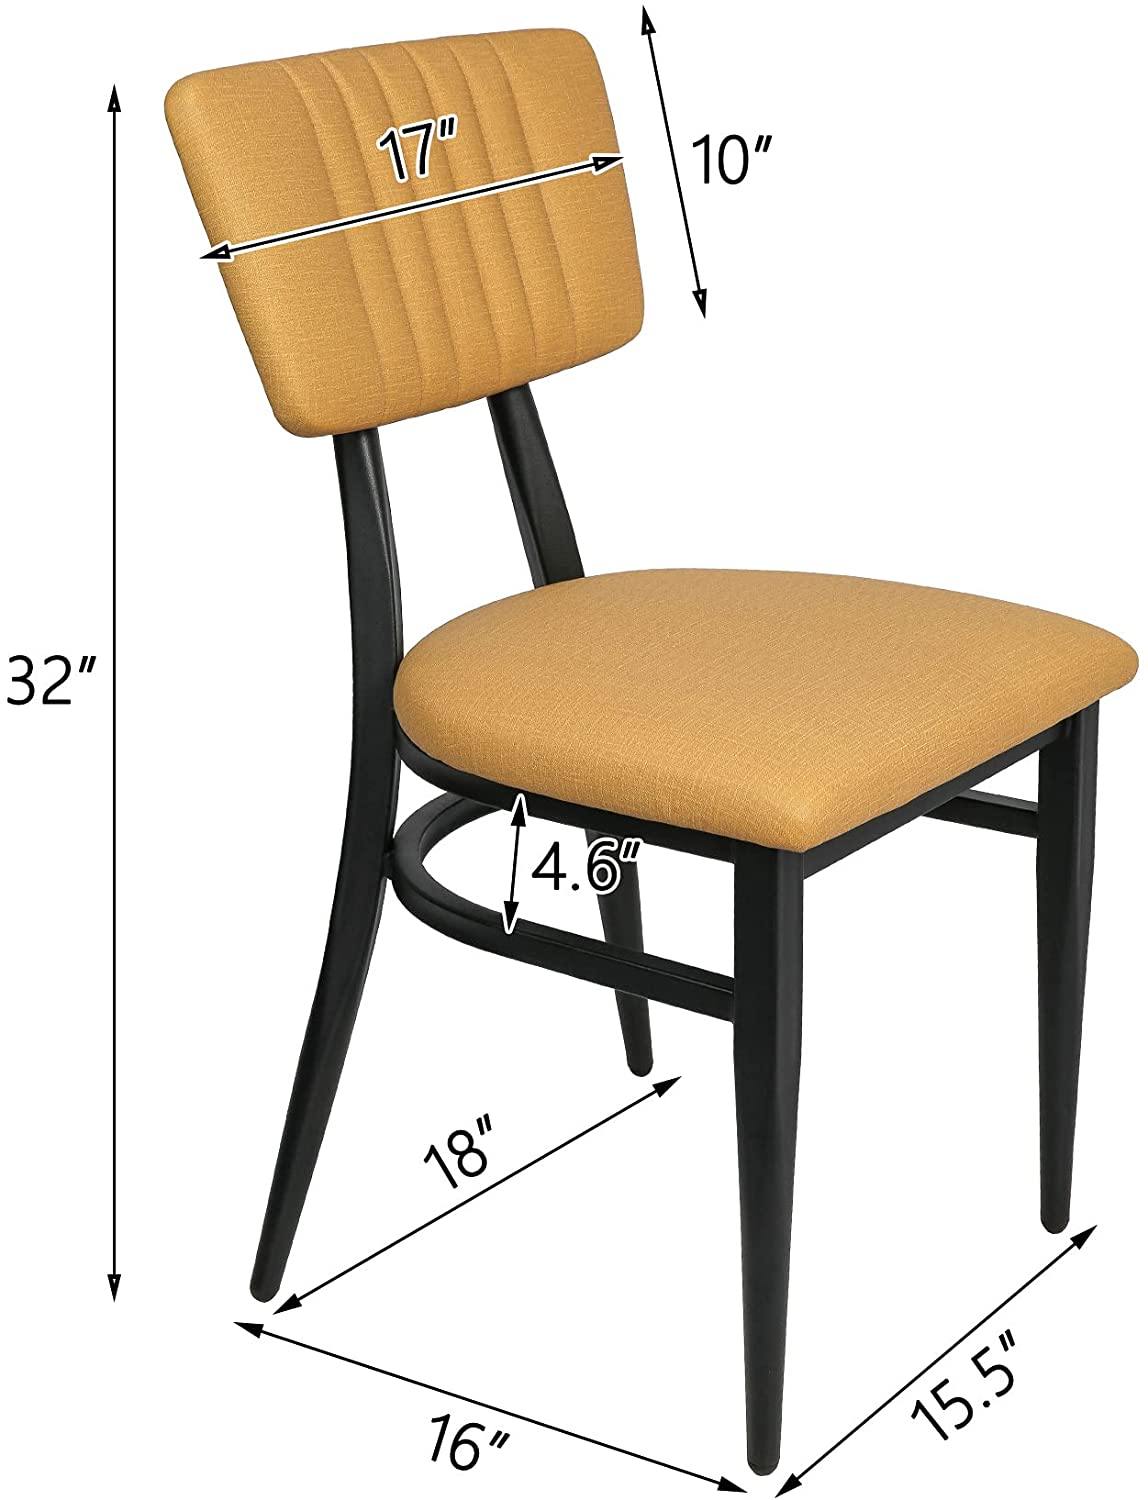 Set of 2 Mid-Century Modern Dining Room Chair with Cushion Metal Frame Classy Kitchen Side Chair for Pub Coffee Shop, Orange - Bosonshop